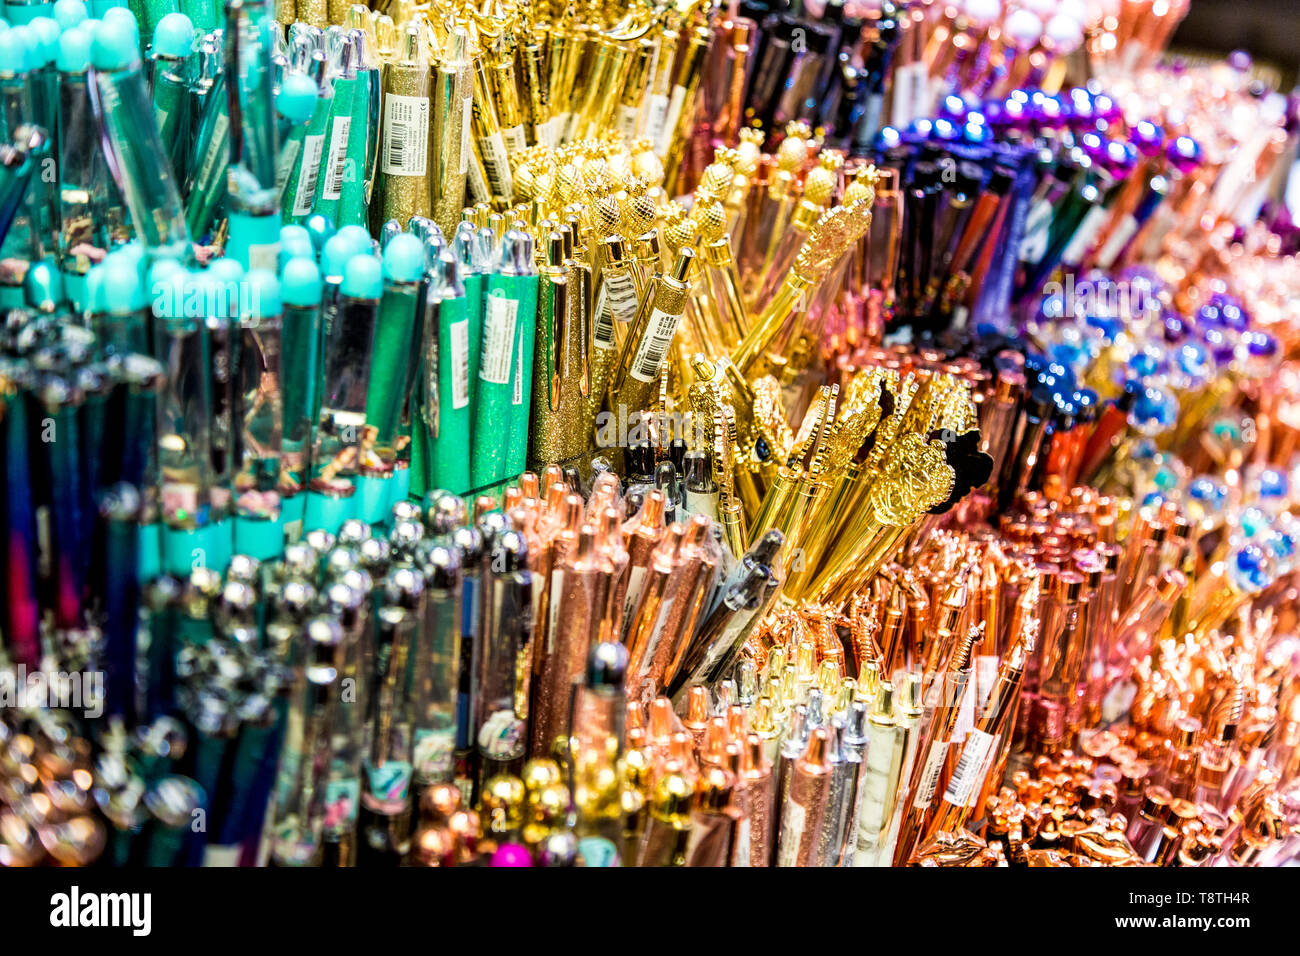 Display of pens at a shop (Typo, Westfield Stratford, London, UK) Stock Photo